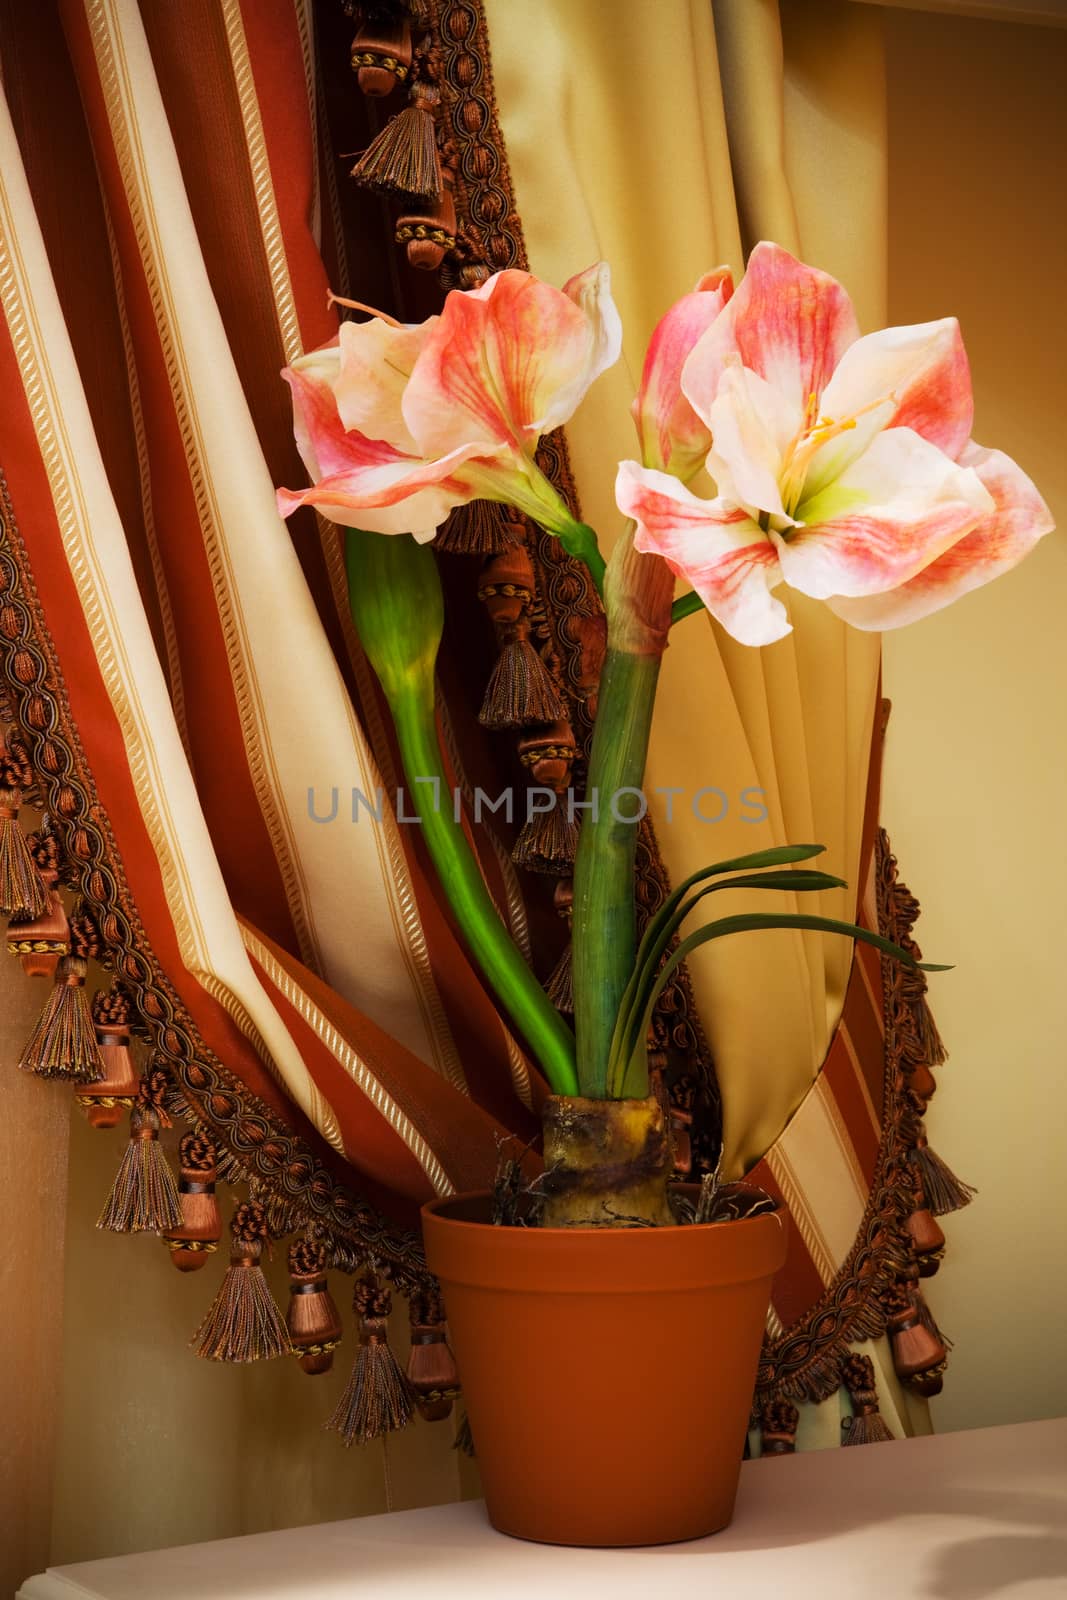 indoor flower on a background of curtains in the apartment